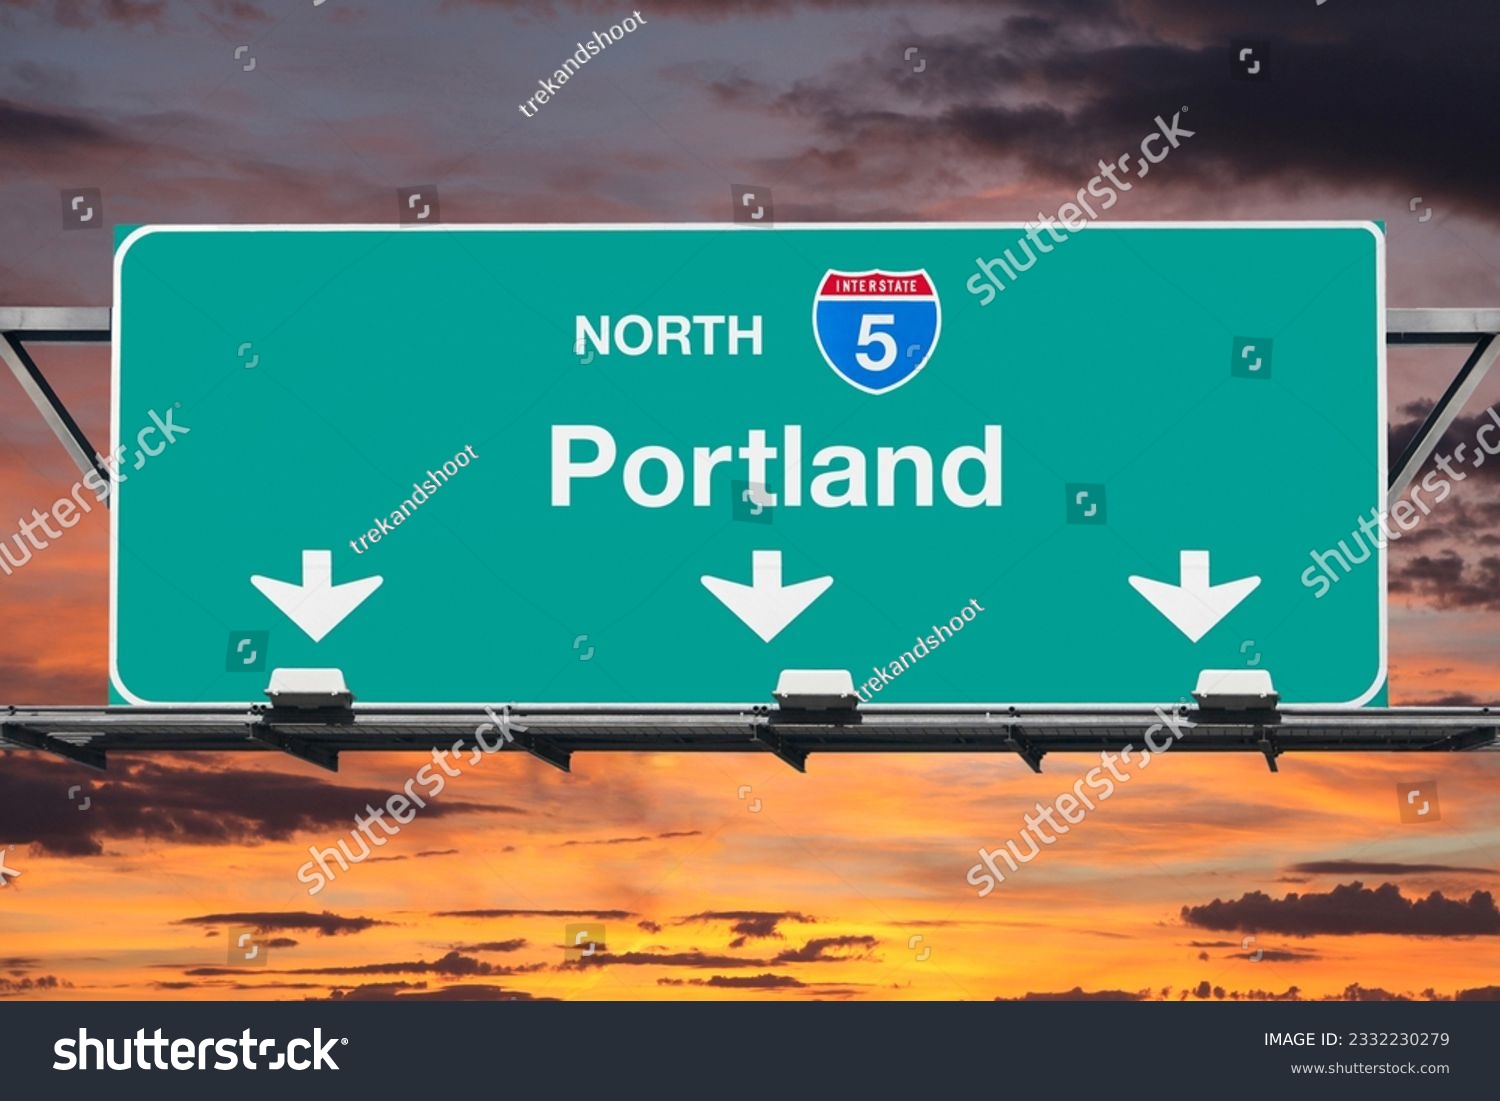 Portland Oregon route 5 north overhead freeway sign with sunset sky. #2332230279